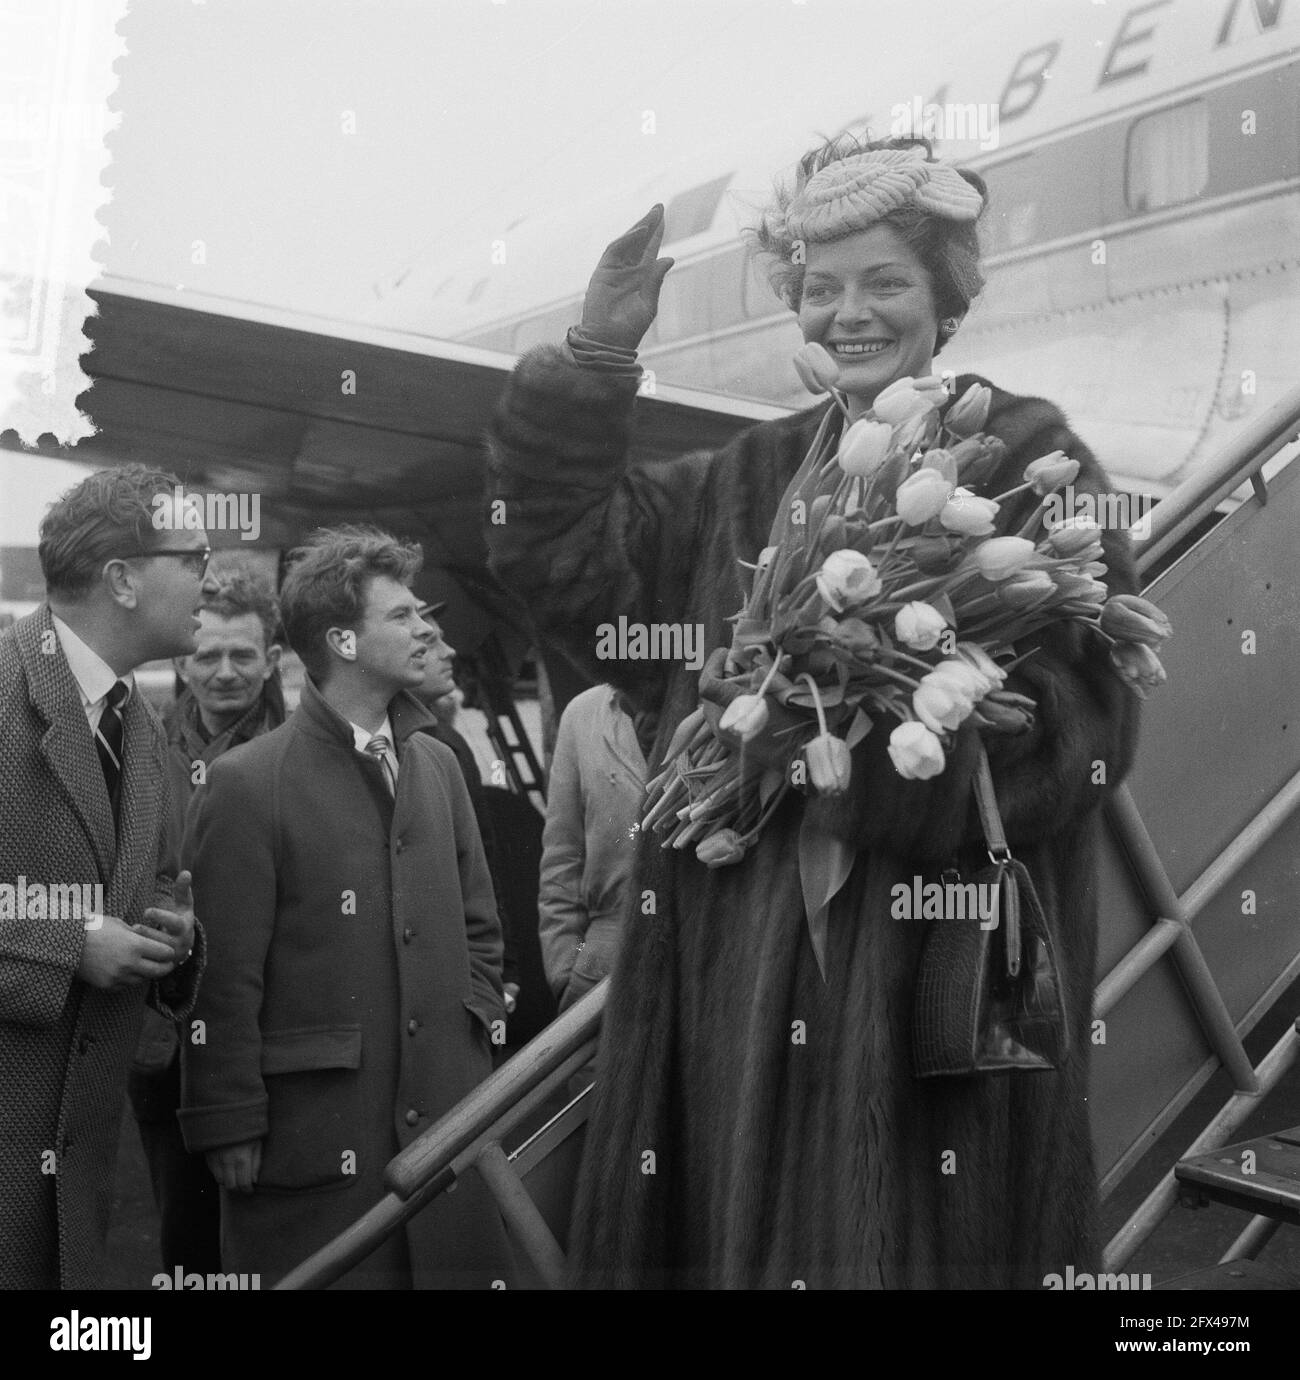 The Swiss singer Lys Assia at Schiphol Airport, March 17, 1957, singers, The Netherlands, 20th century press agency photo, news to remember, documentary, historic photography 1945-1990, visual stories, human history of the Twentieth Century, capturing moments in time Stock Photo